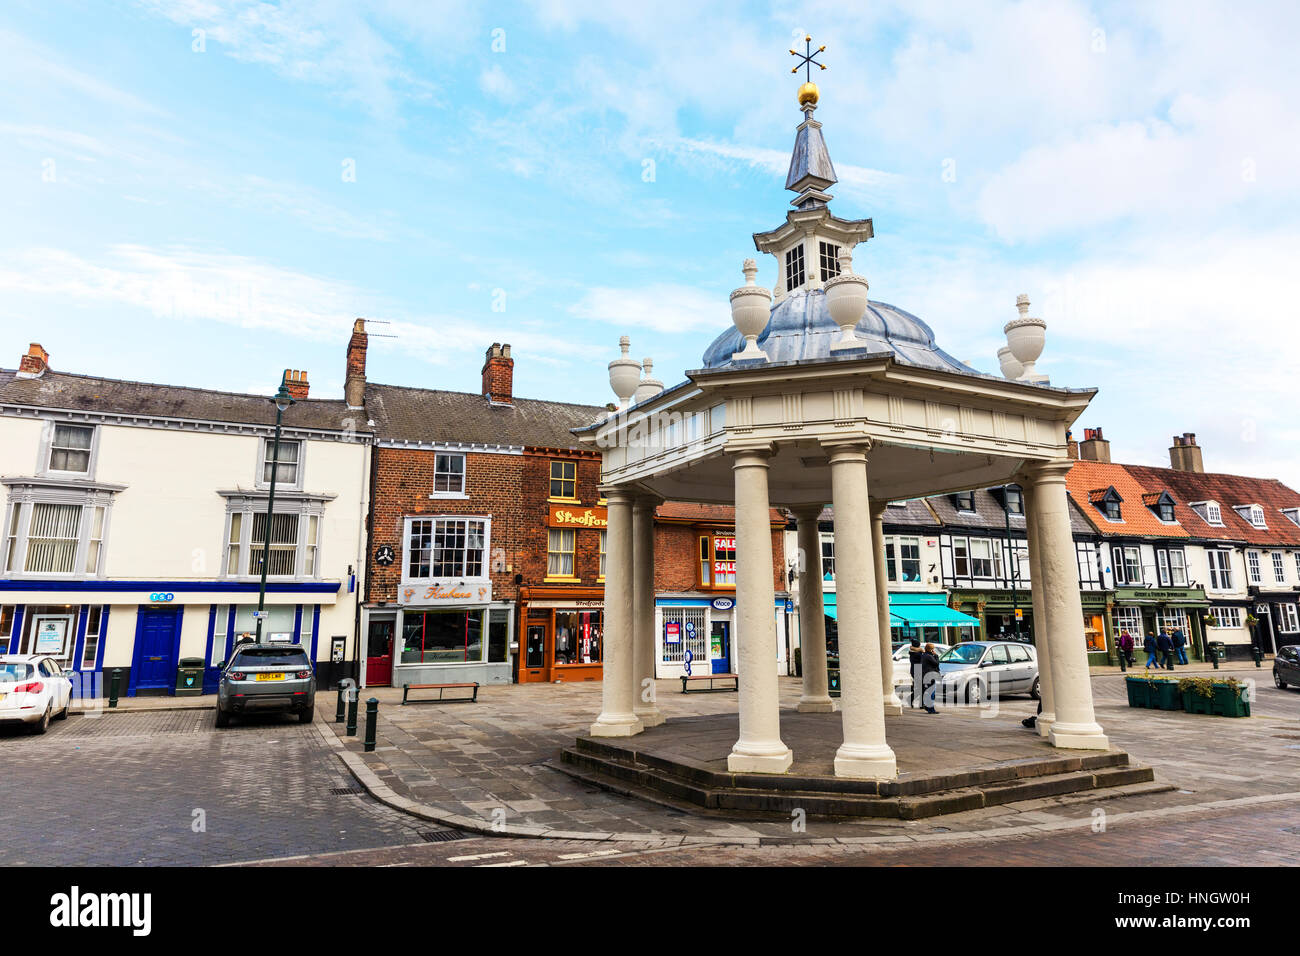 Beverley town centre east riding Yorkshire UK England Beverley bandstand market cross town center Stock Photo